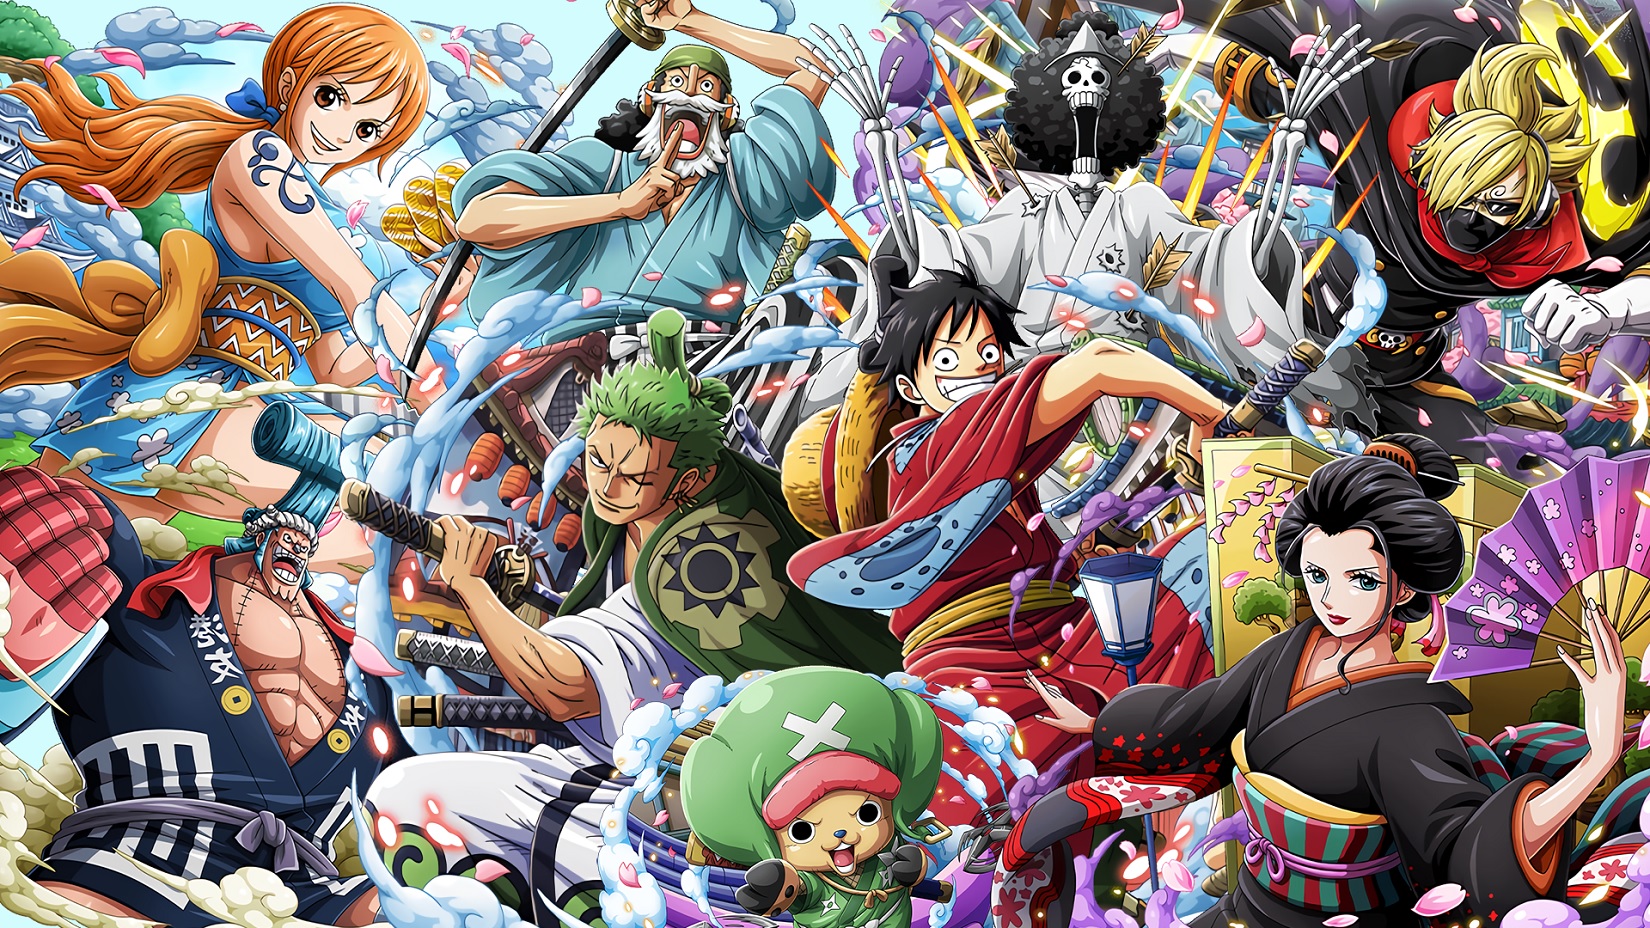 The One Piece manga's characters' crucial details must be deciphered by the audience